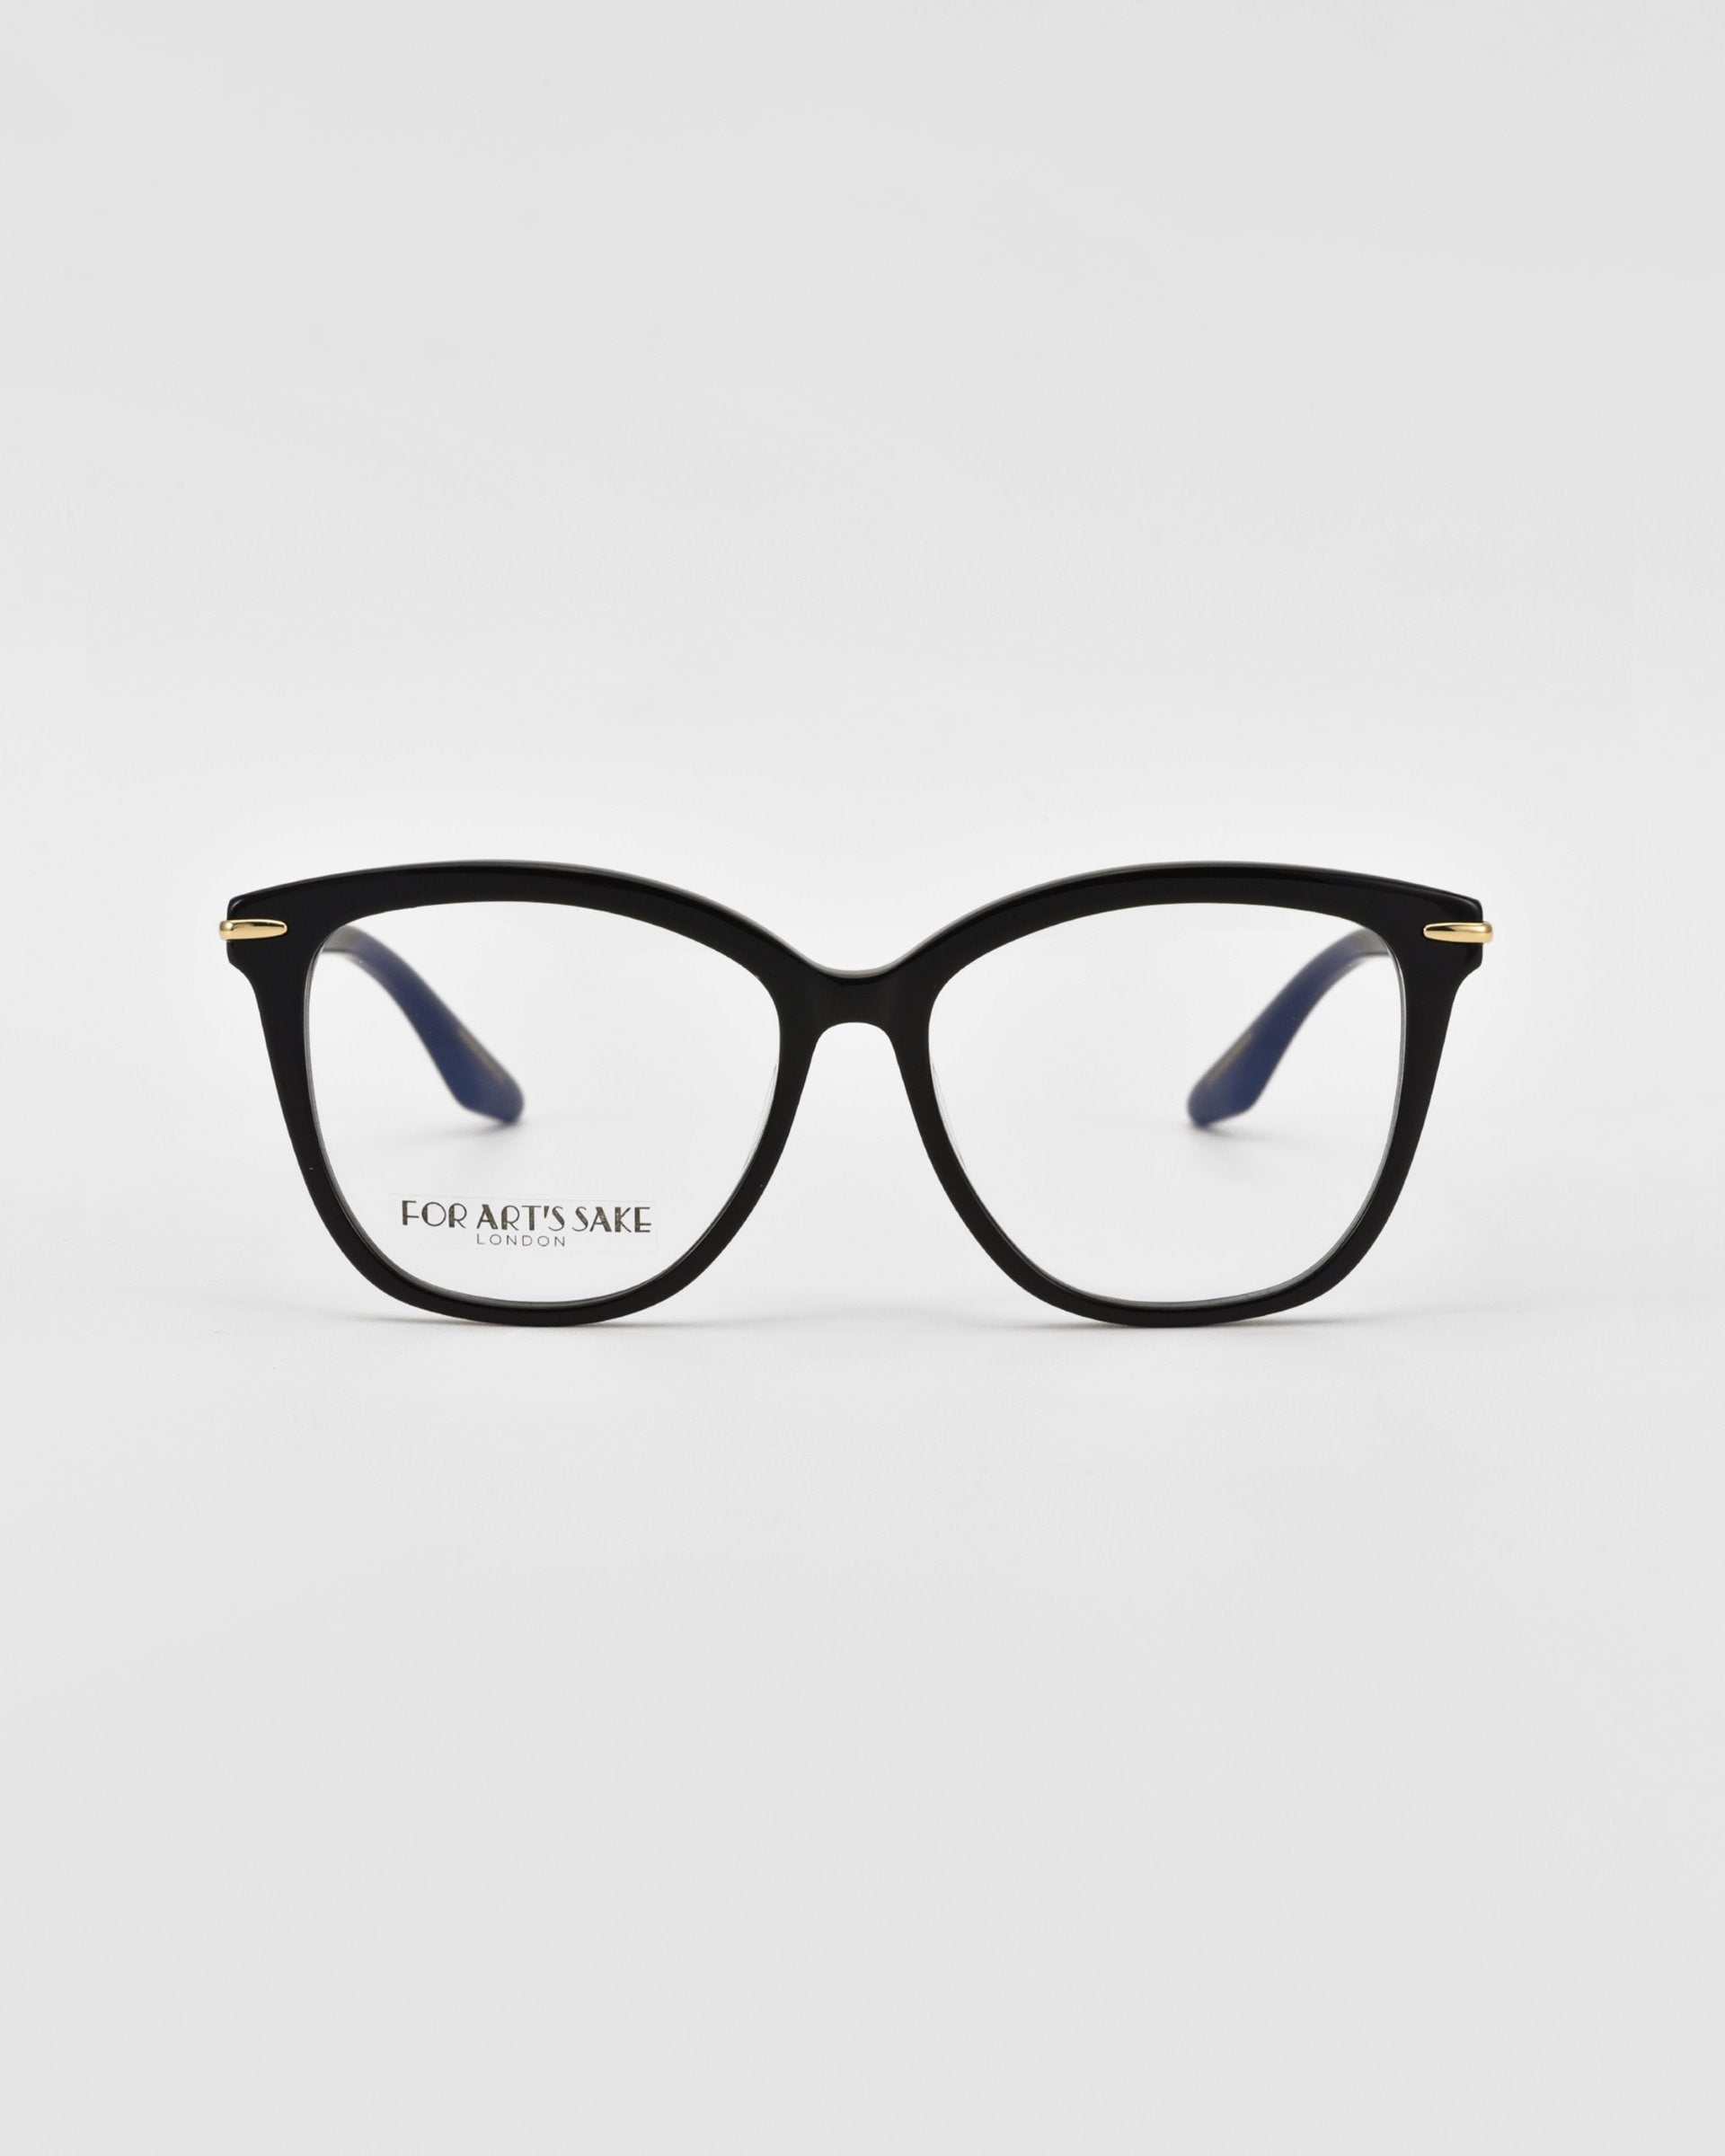 A pair of black rectangular Cadenza optical glasses with a slight cat-eye shape, featuring gold accents on the temple arms. The glasses are displayed against a plain white background. The brand name &quot;For Art&#39;s Sake®&quot; is visible on the inner side of the right lens.